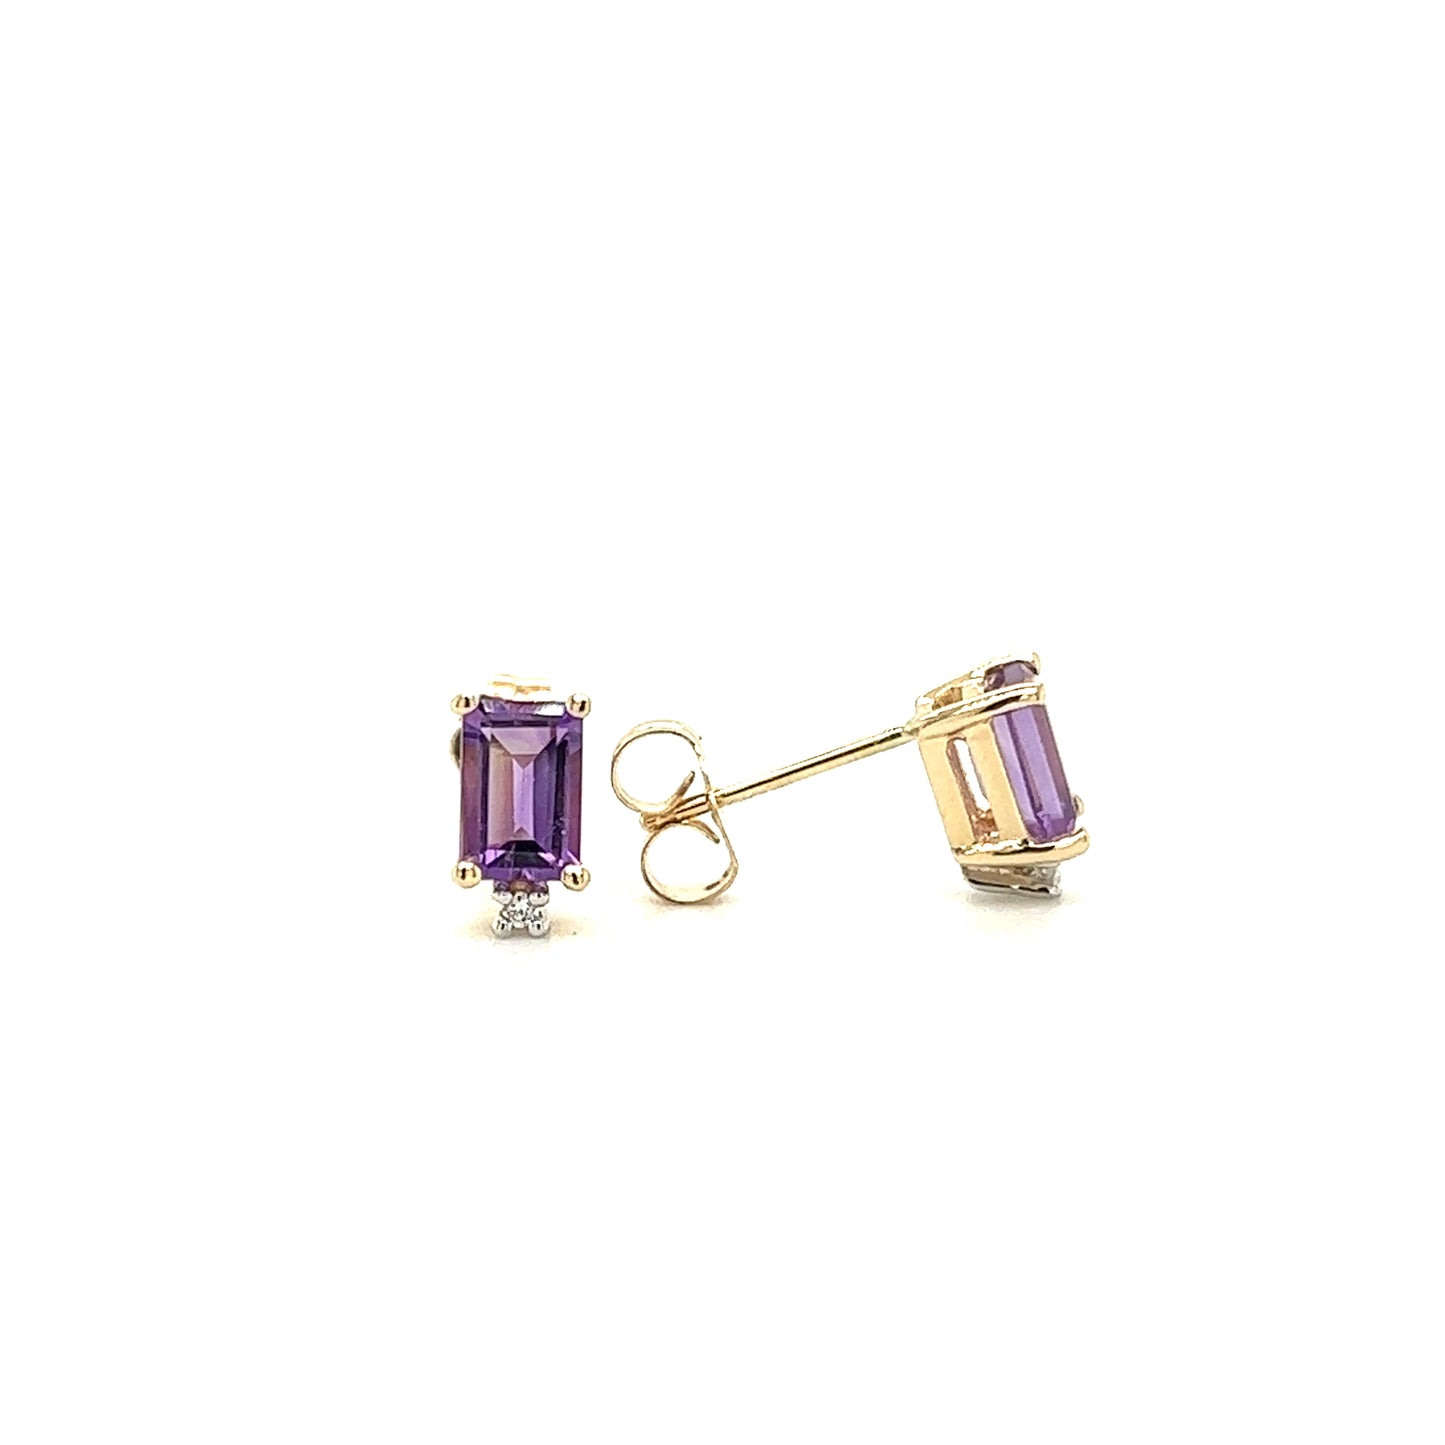 Baguette Amethyst Stud Earrings with Acent Diamonds in 14K Yellow Gold Front and Side View